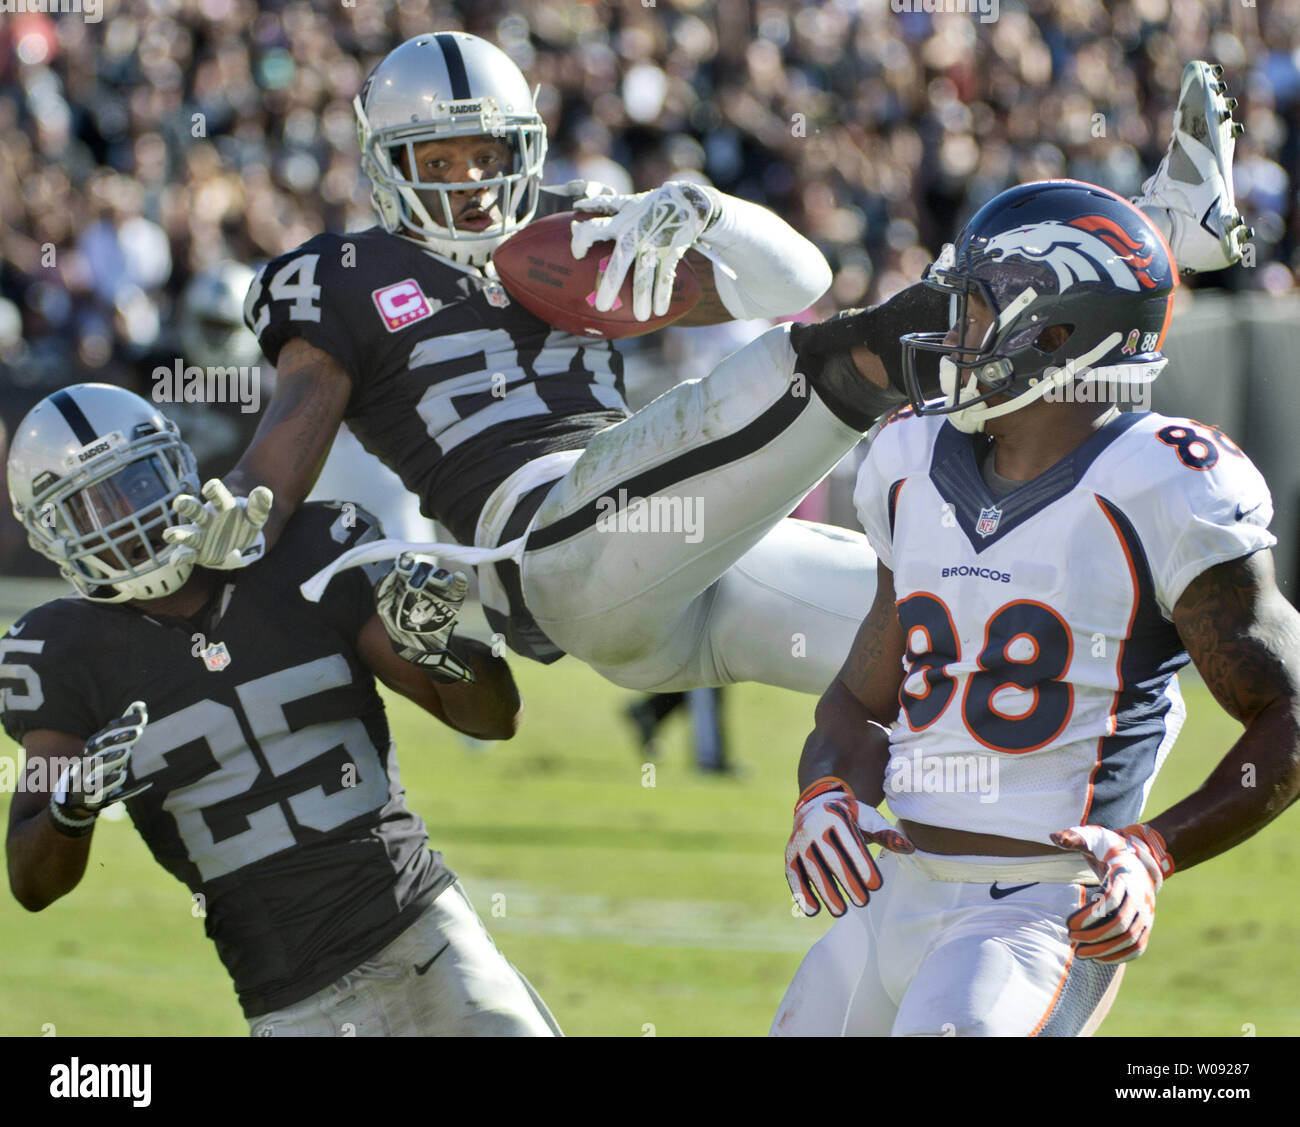 Oakland Raiders Charles Woodson (24) goes high to intercept a Denver Broncos Peyton Manning pass intended for Demaryius Thomas (88) in the third quarter at O.co Coliseum in Oakland, California on October 11, 2015. The Broncos defeated the Raiders 16-10.  Photo by Terry Schmitt/UPI Stock Photo